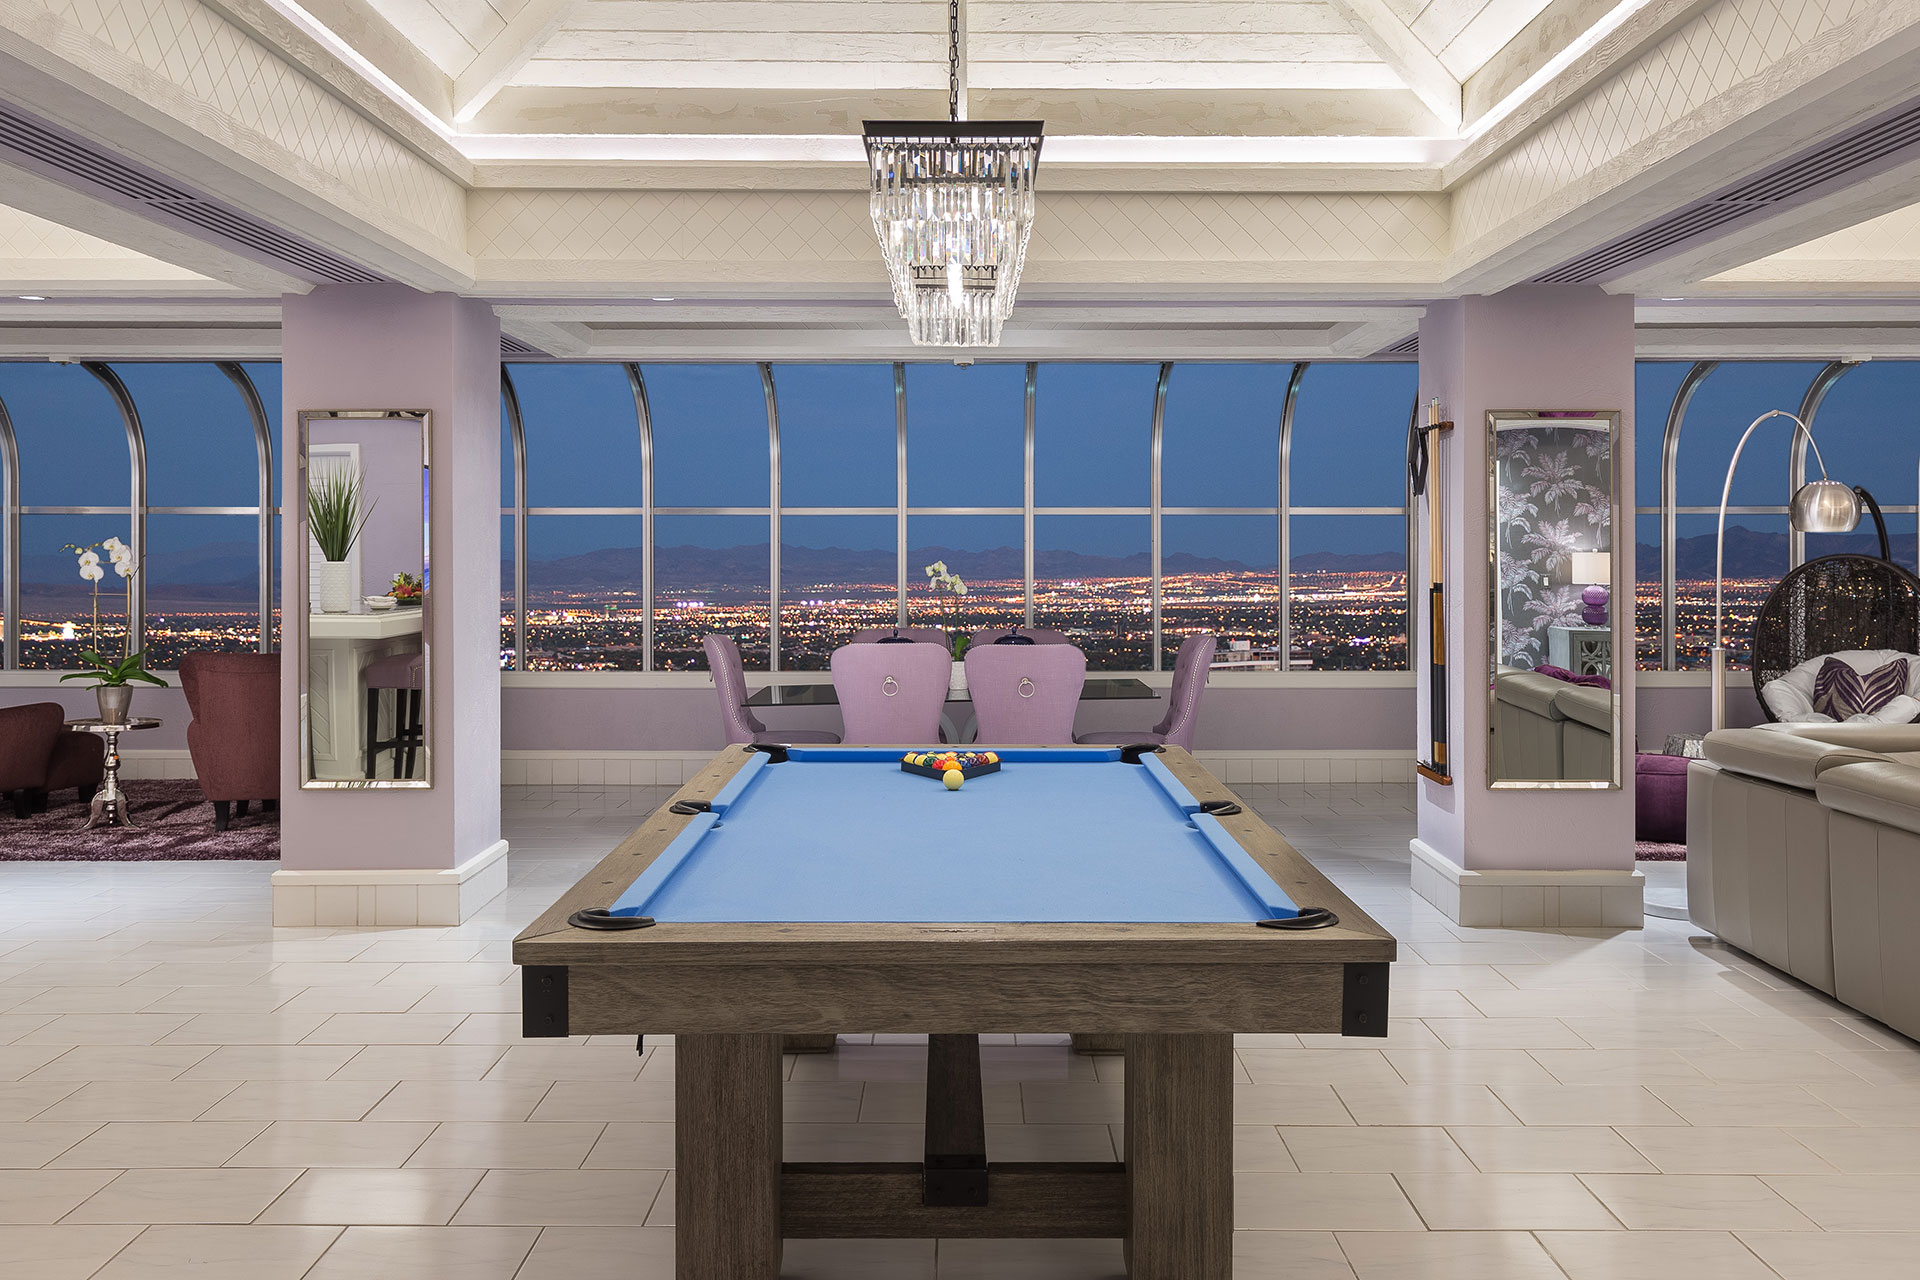 A blue-surfaced pool table in a lavendar-toned hotel room with a dining table and wide city view at dusk in the windows.